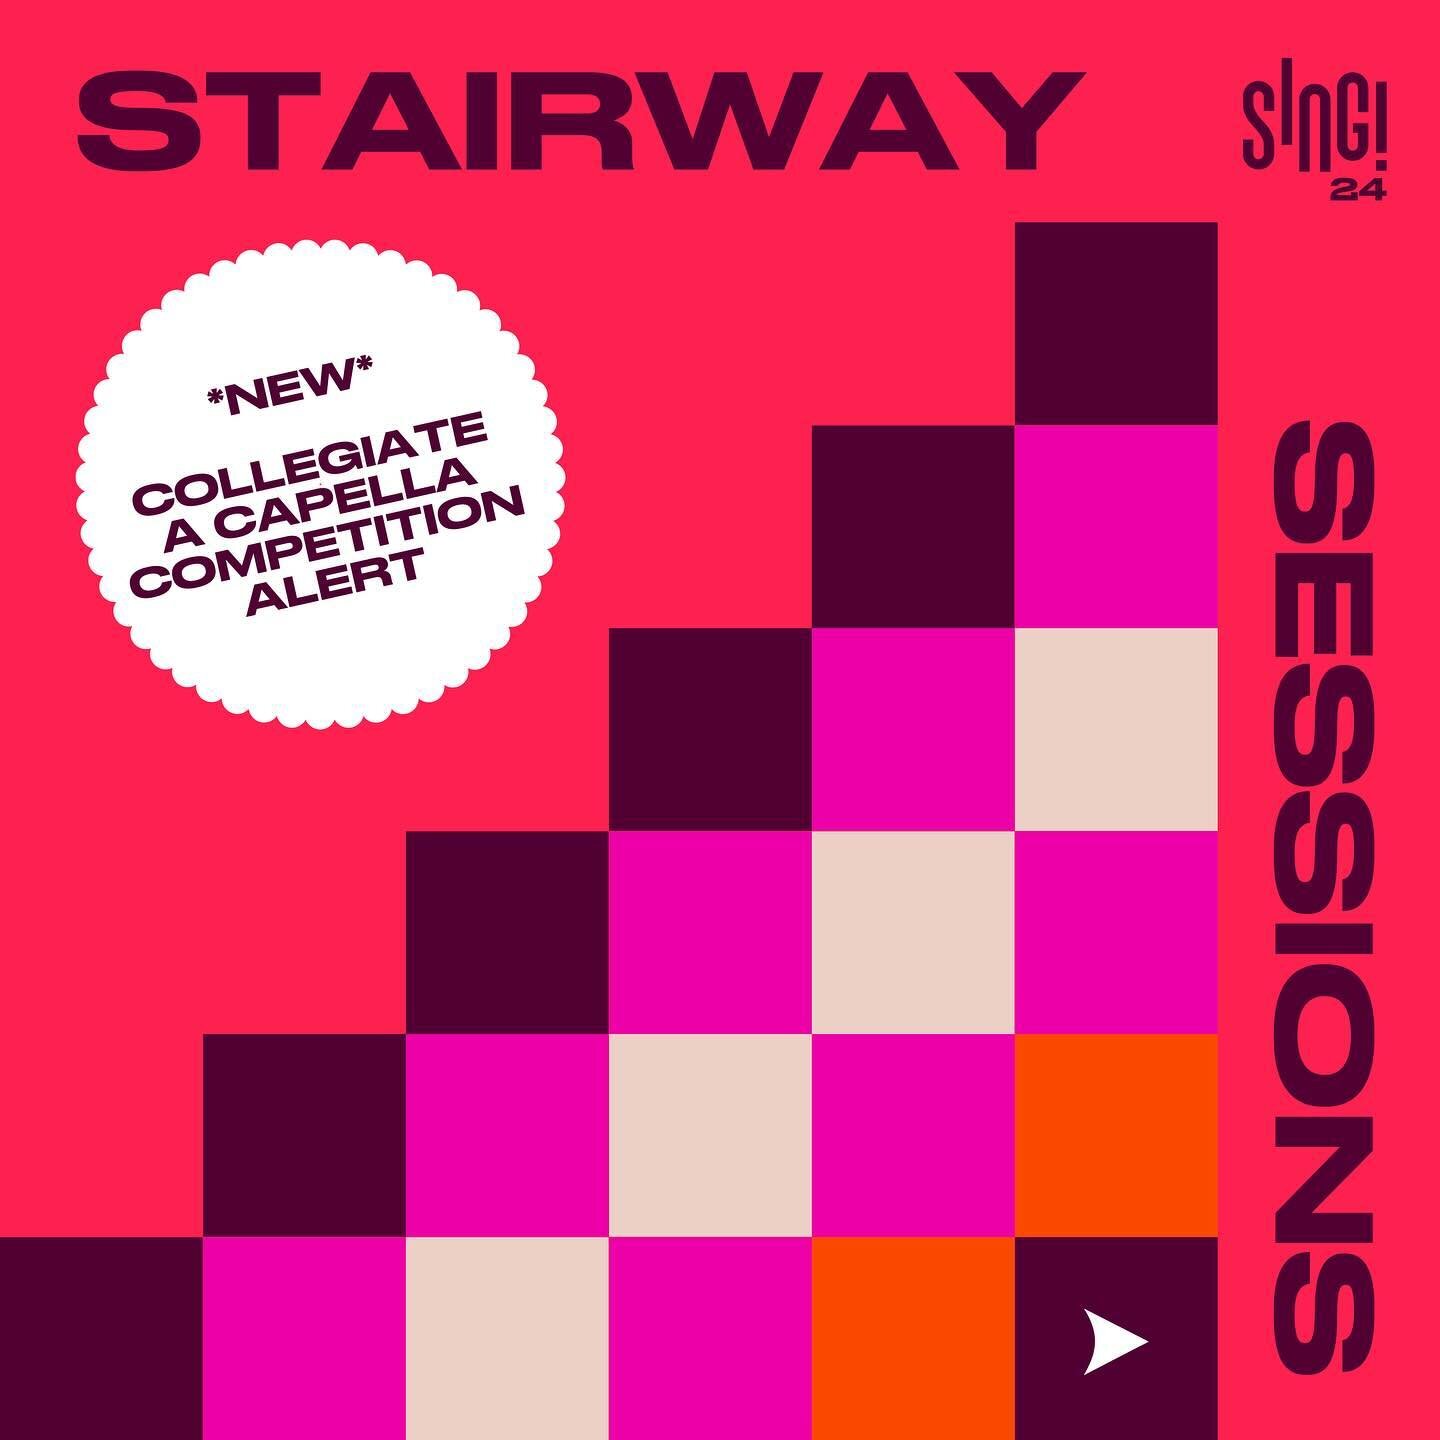 📢 Calling all collegiate a cappella groups! 📢 

Announcing the SING! Stairway Sessions. 

- Submit a video of your group singing your favourite song in a stairwell by May 1st
- Submissions can be sent to AD@singtoronto.com
- SING! will air all of y